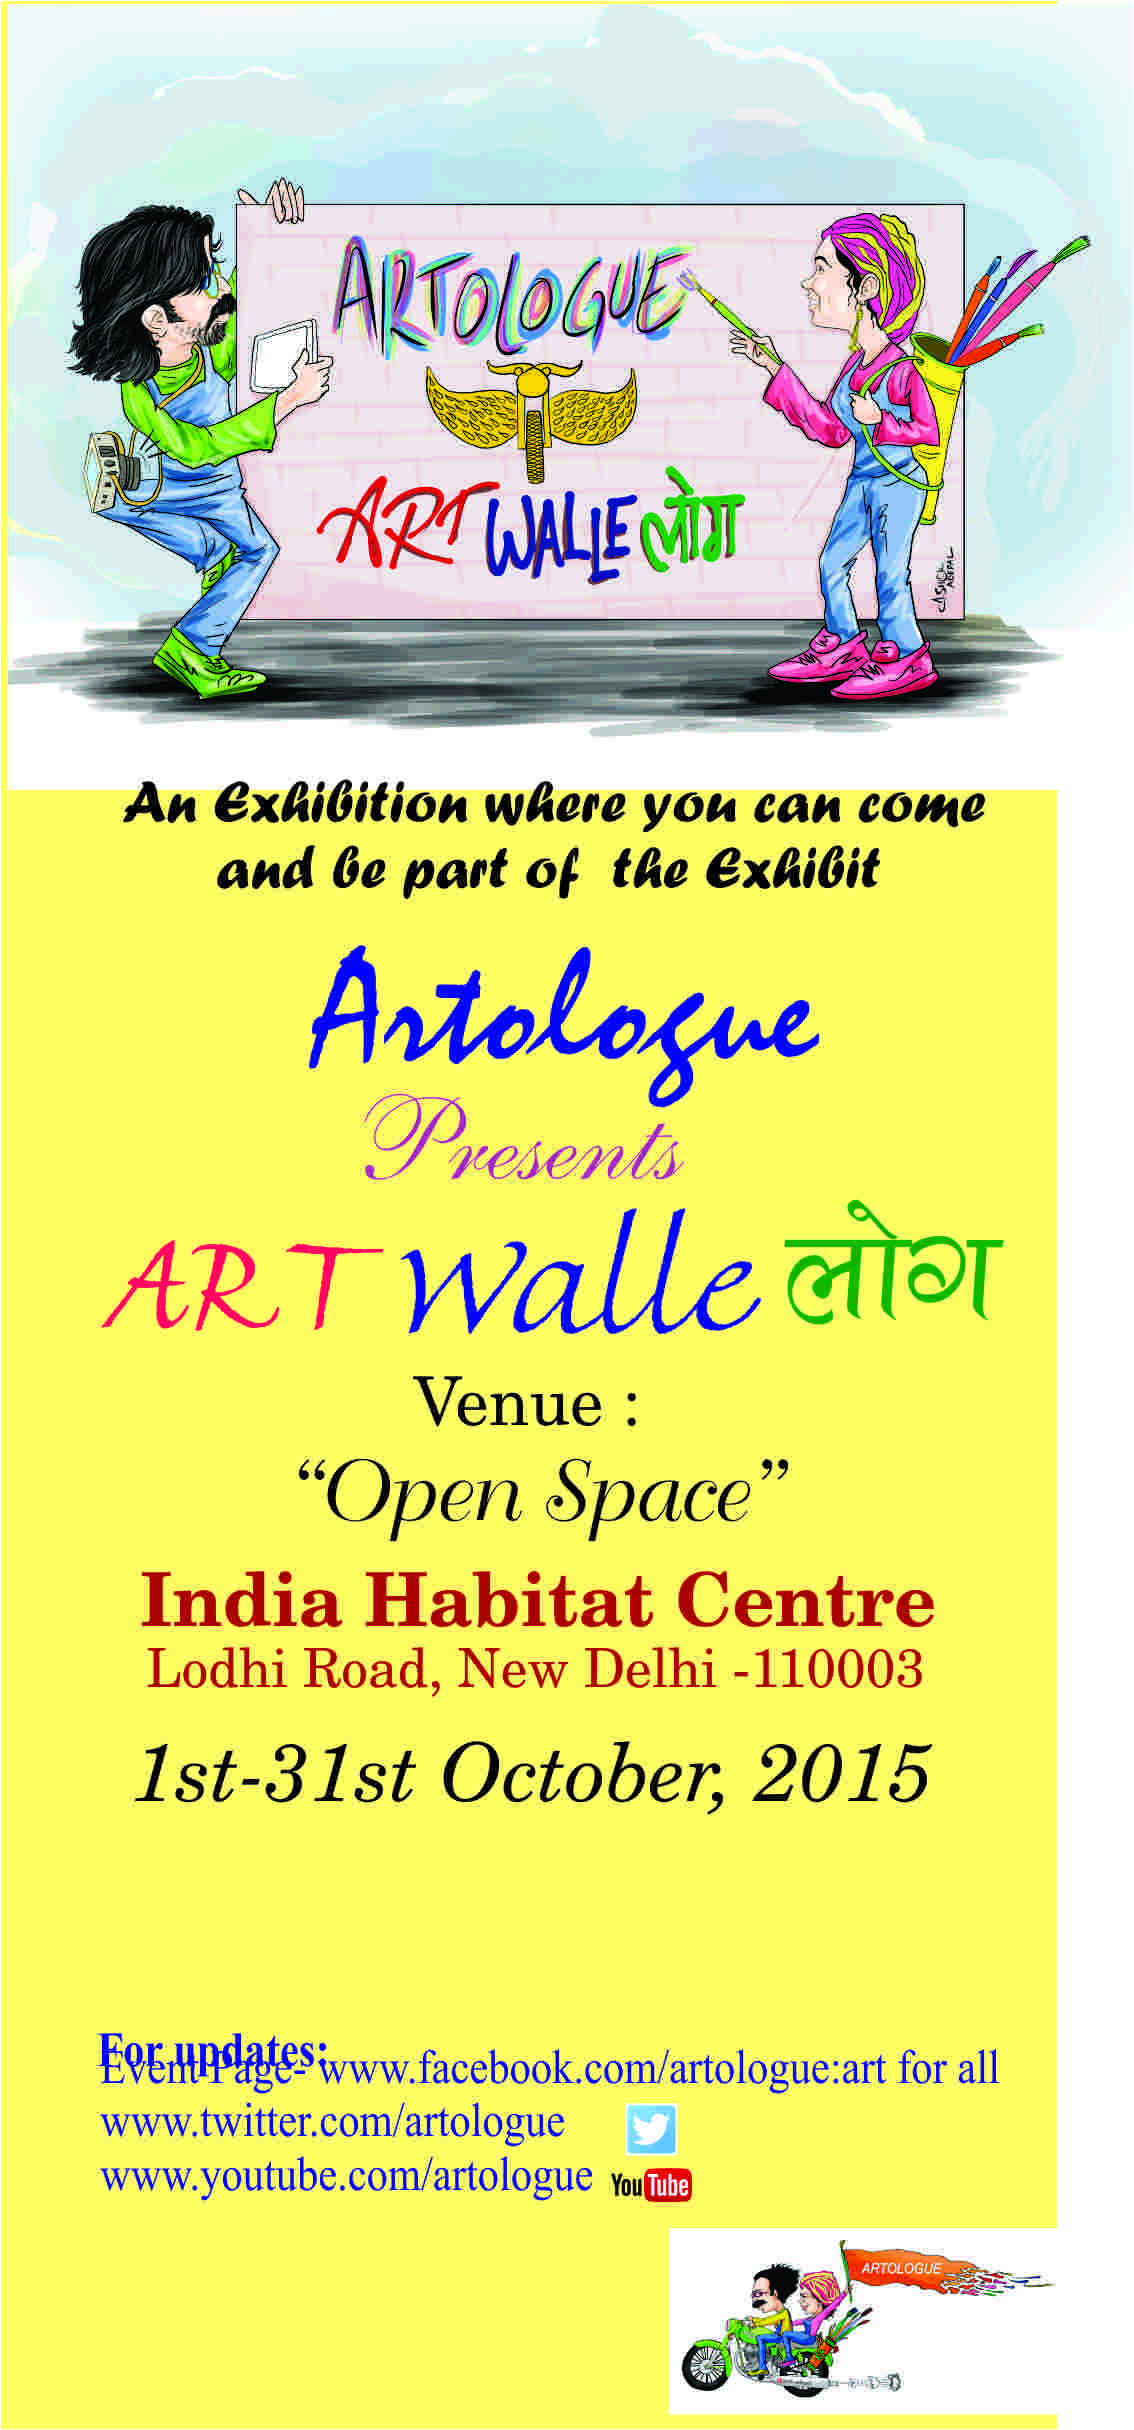 The exhibition has been named as ART WALLE लोग